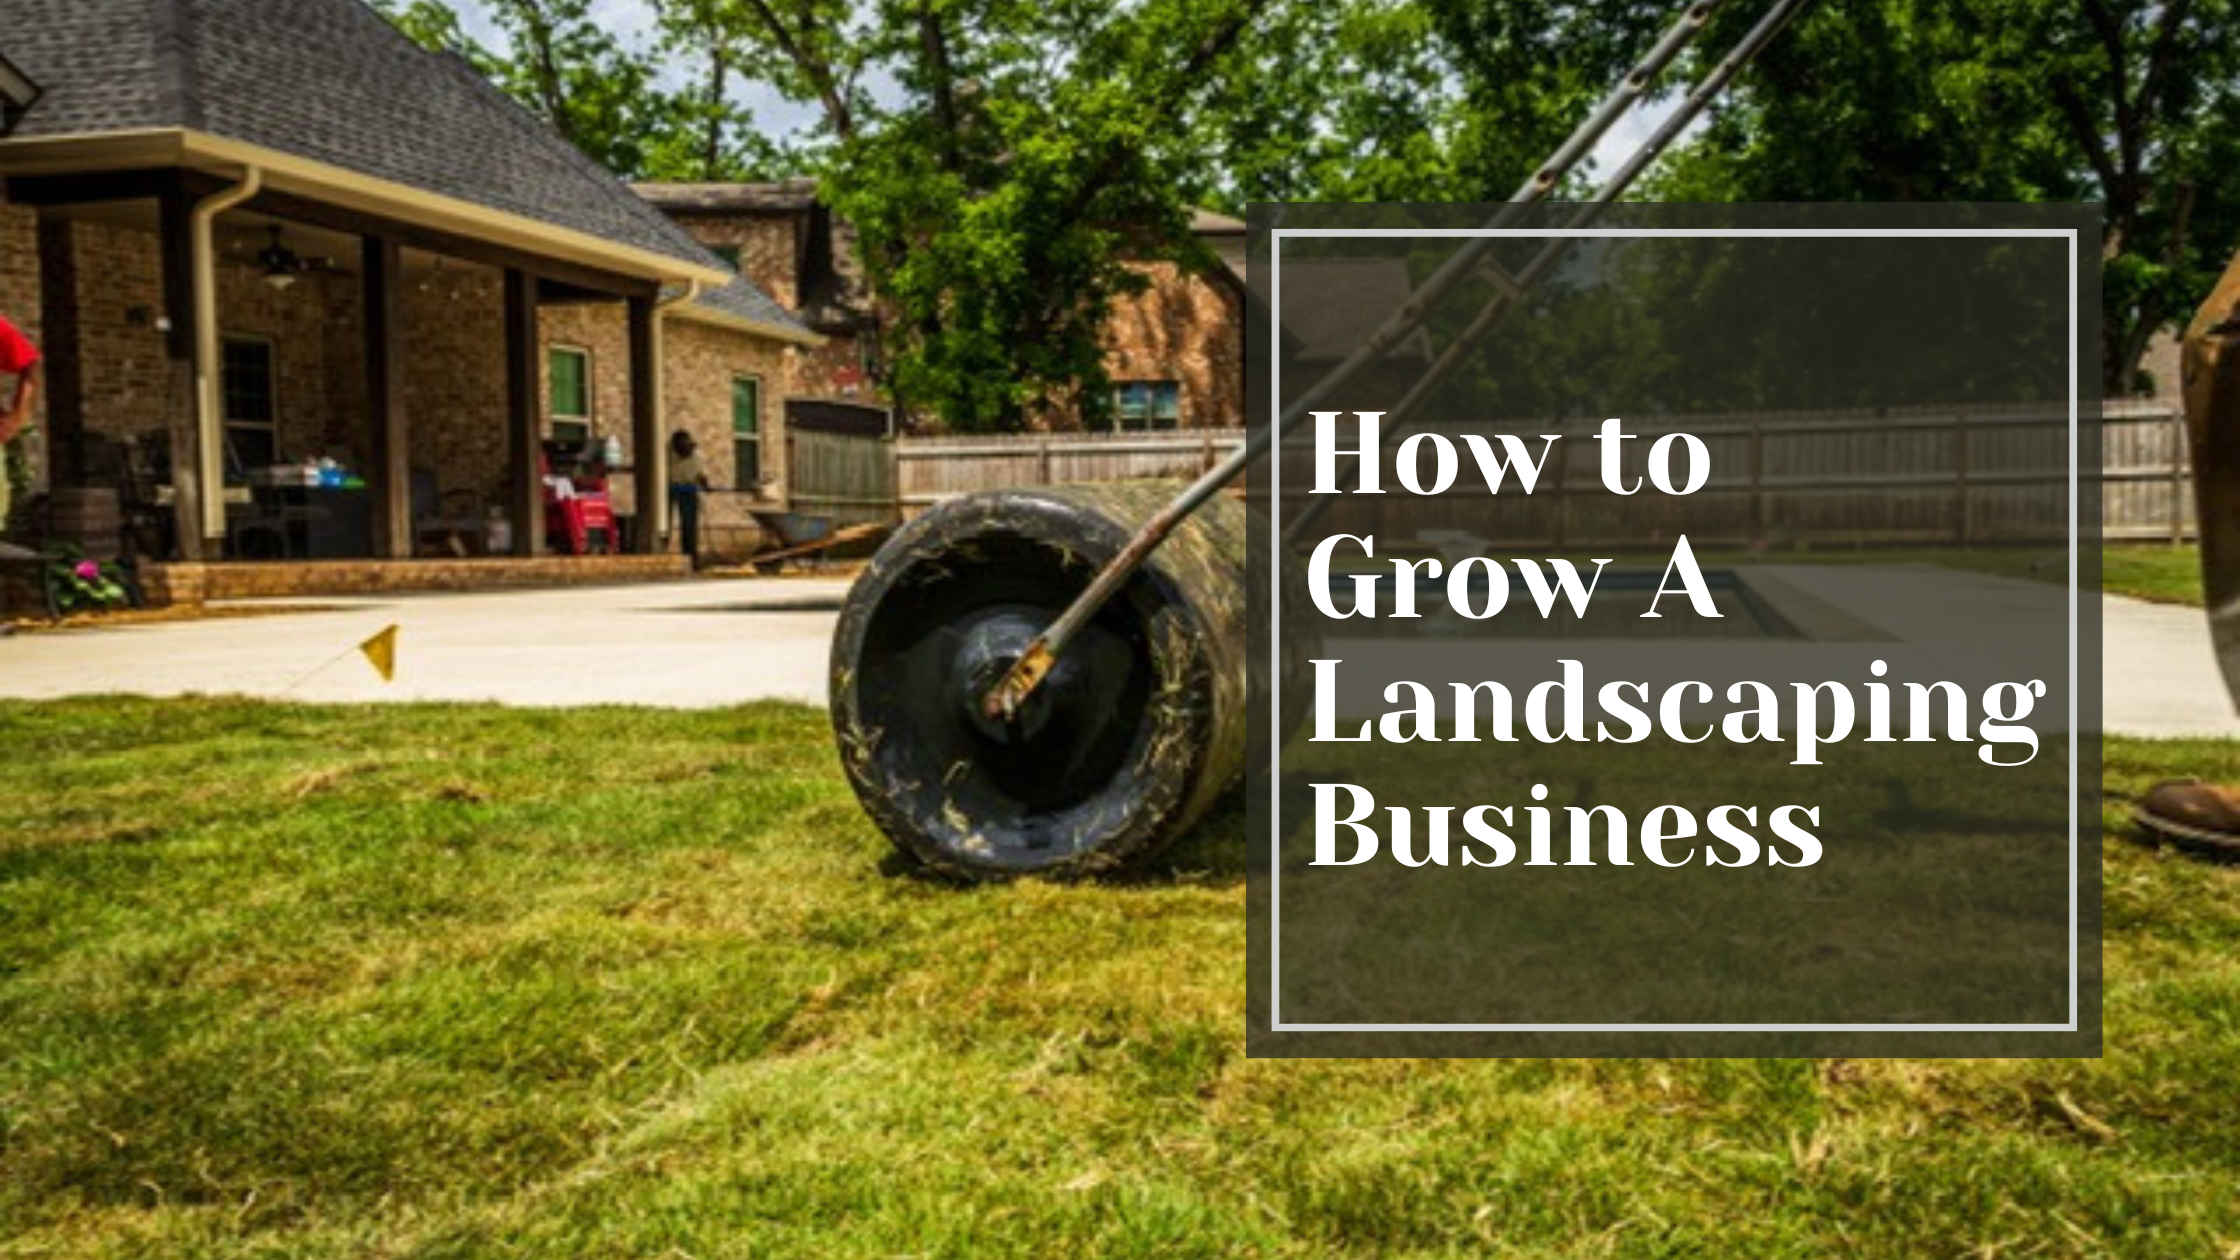 How to Grow A Landscaping Business